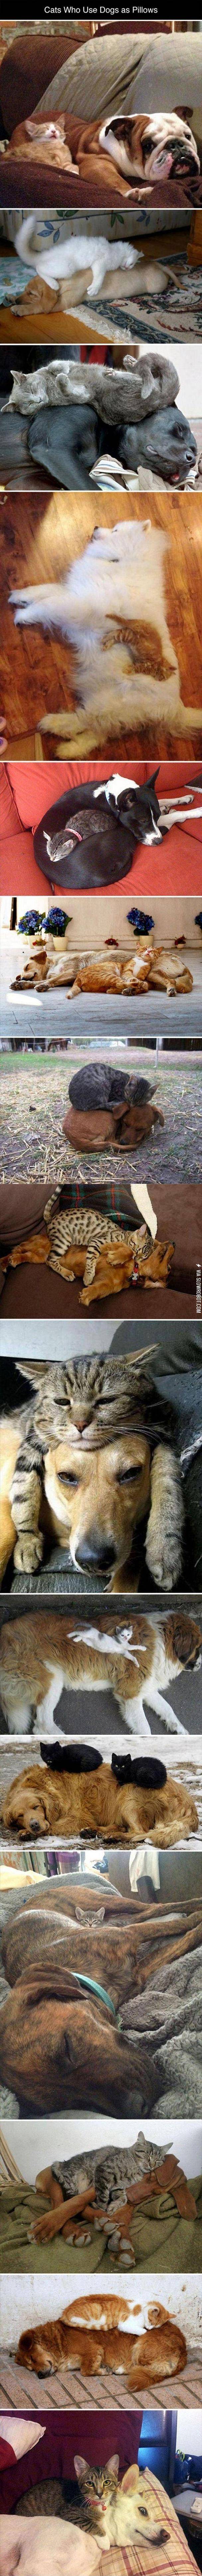 Cats+who+use+dogs+as+pillows